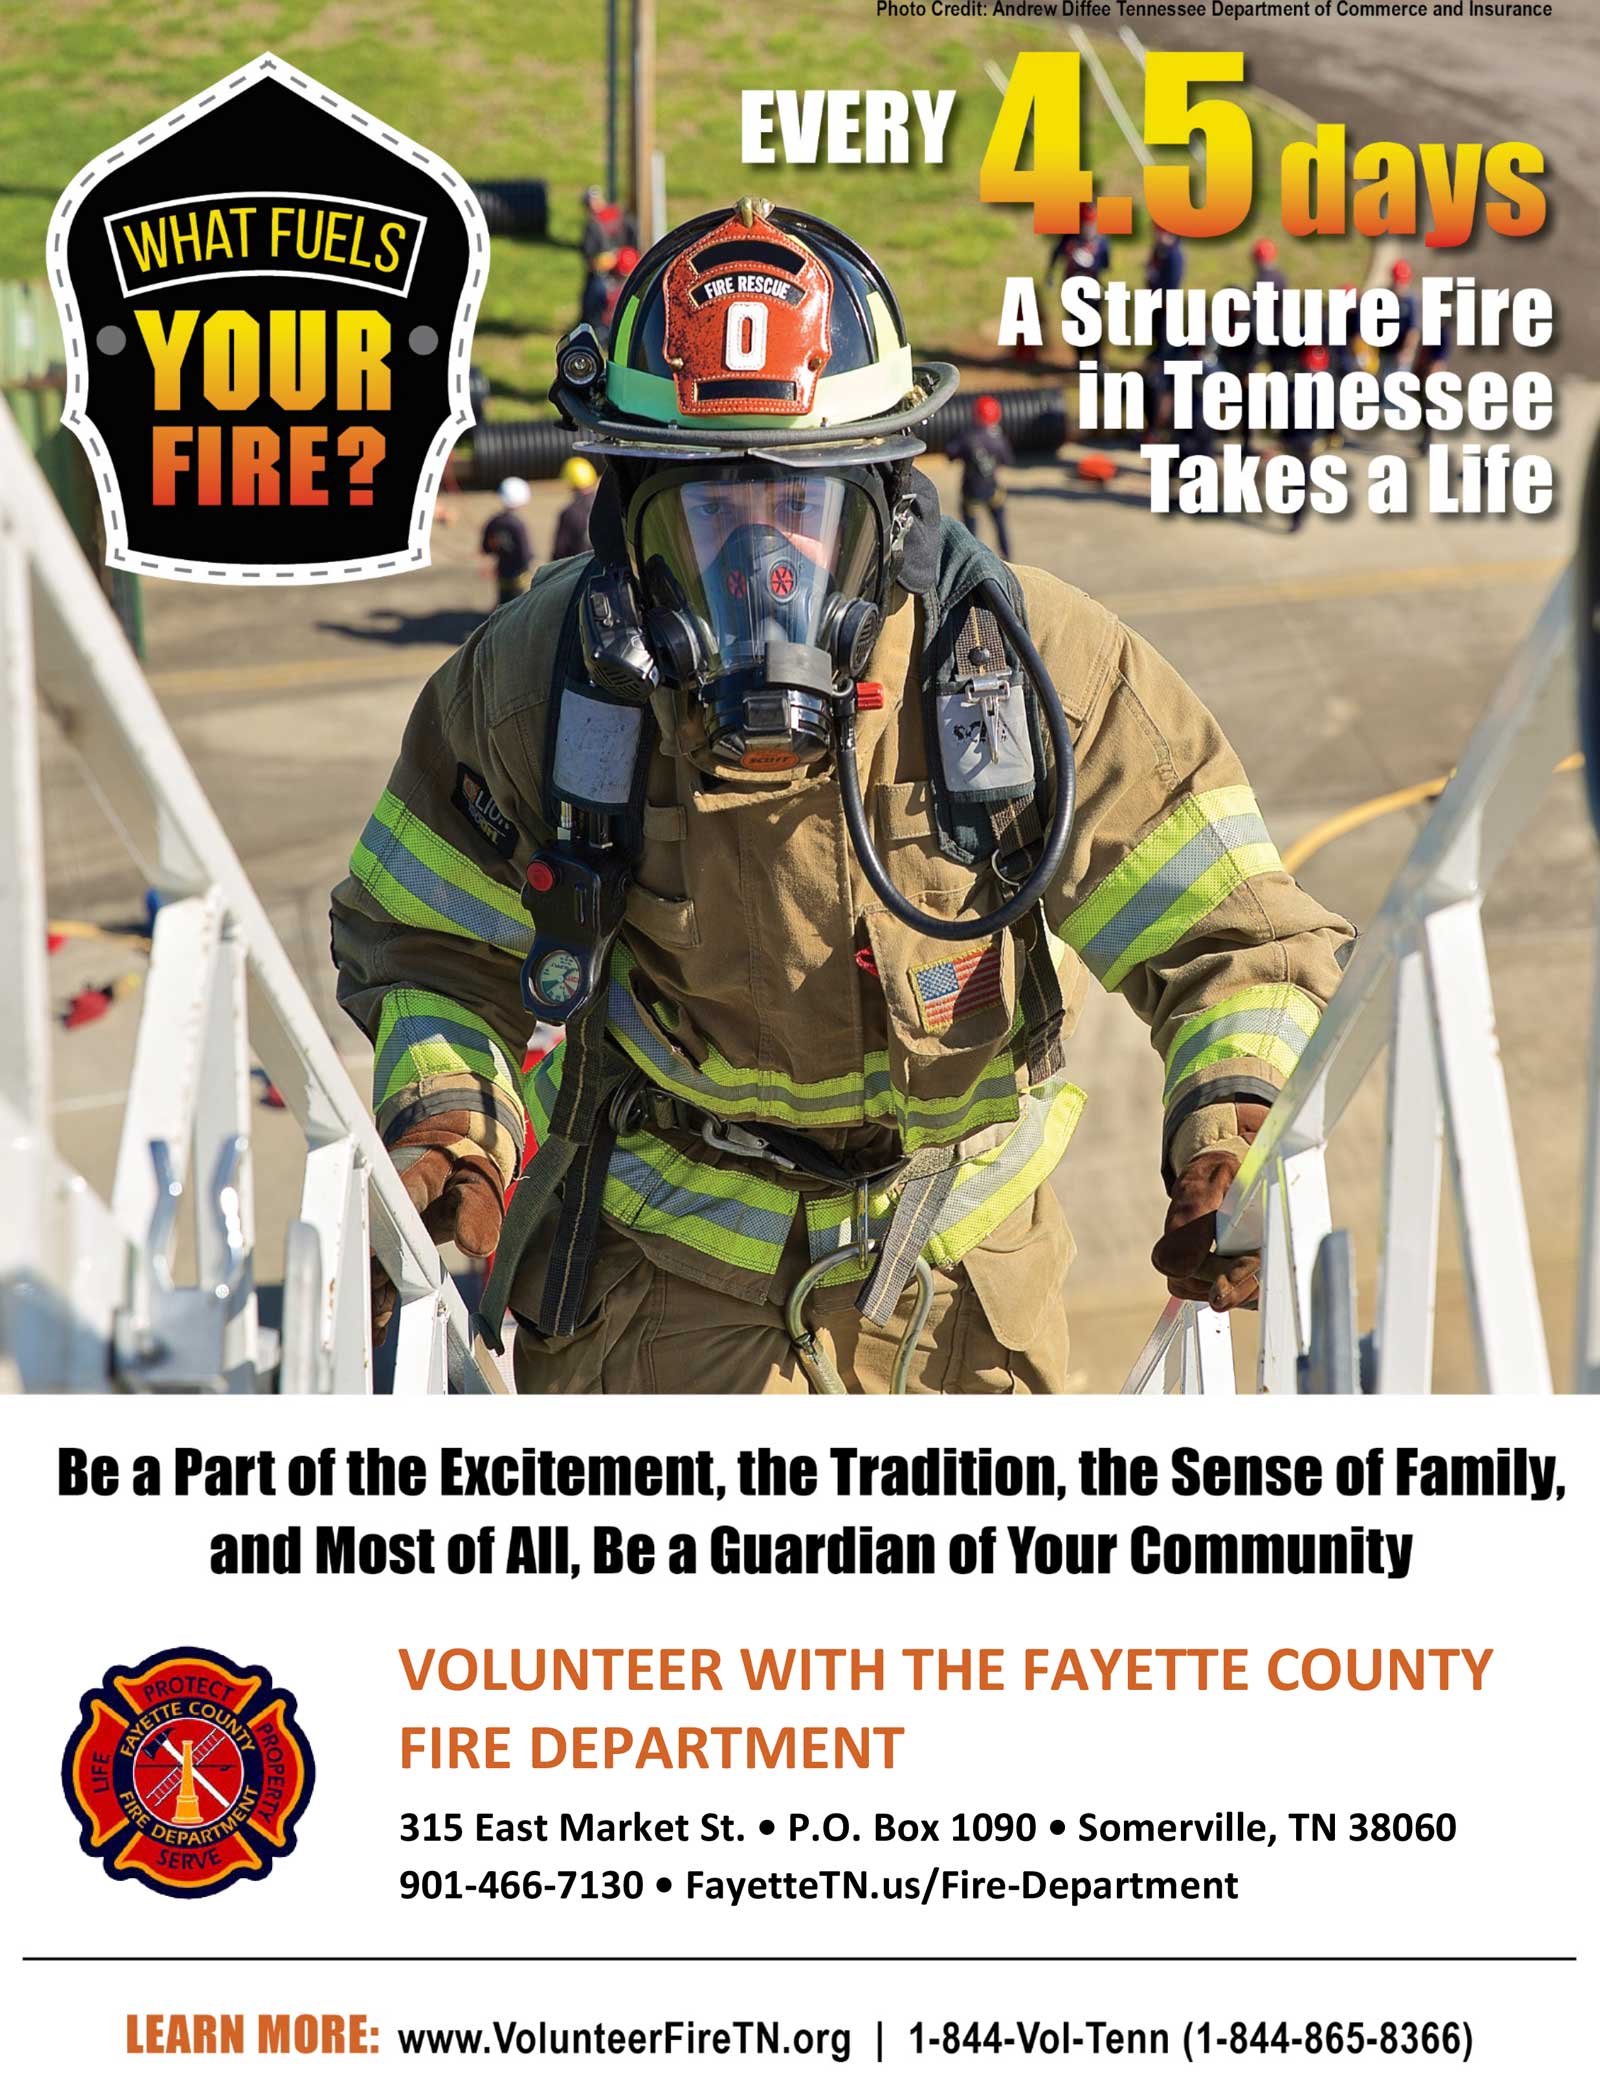 Volunteer with the Fayette County, TN Fire Department